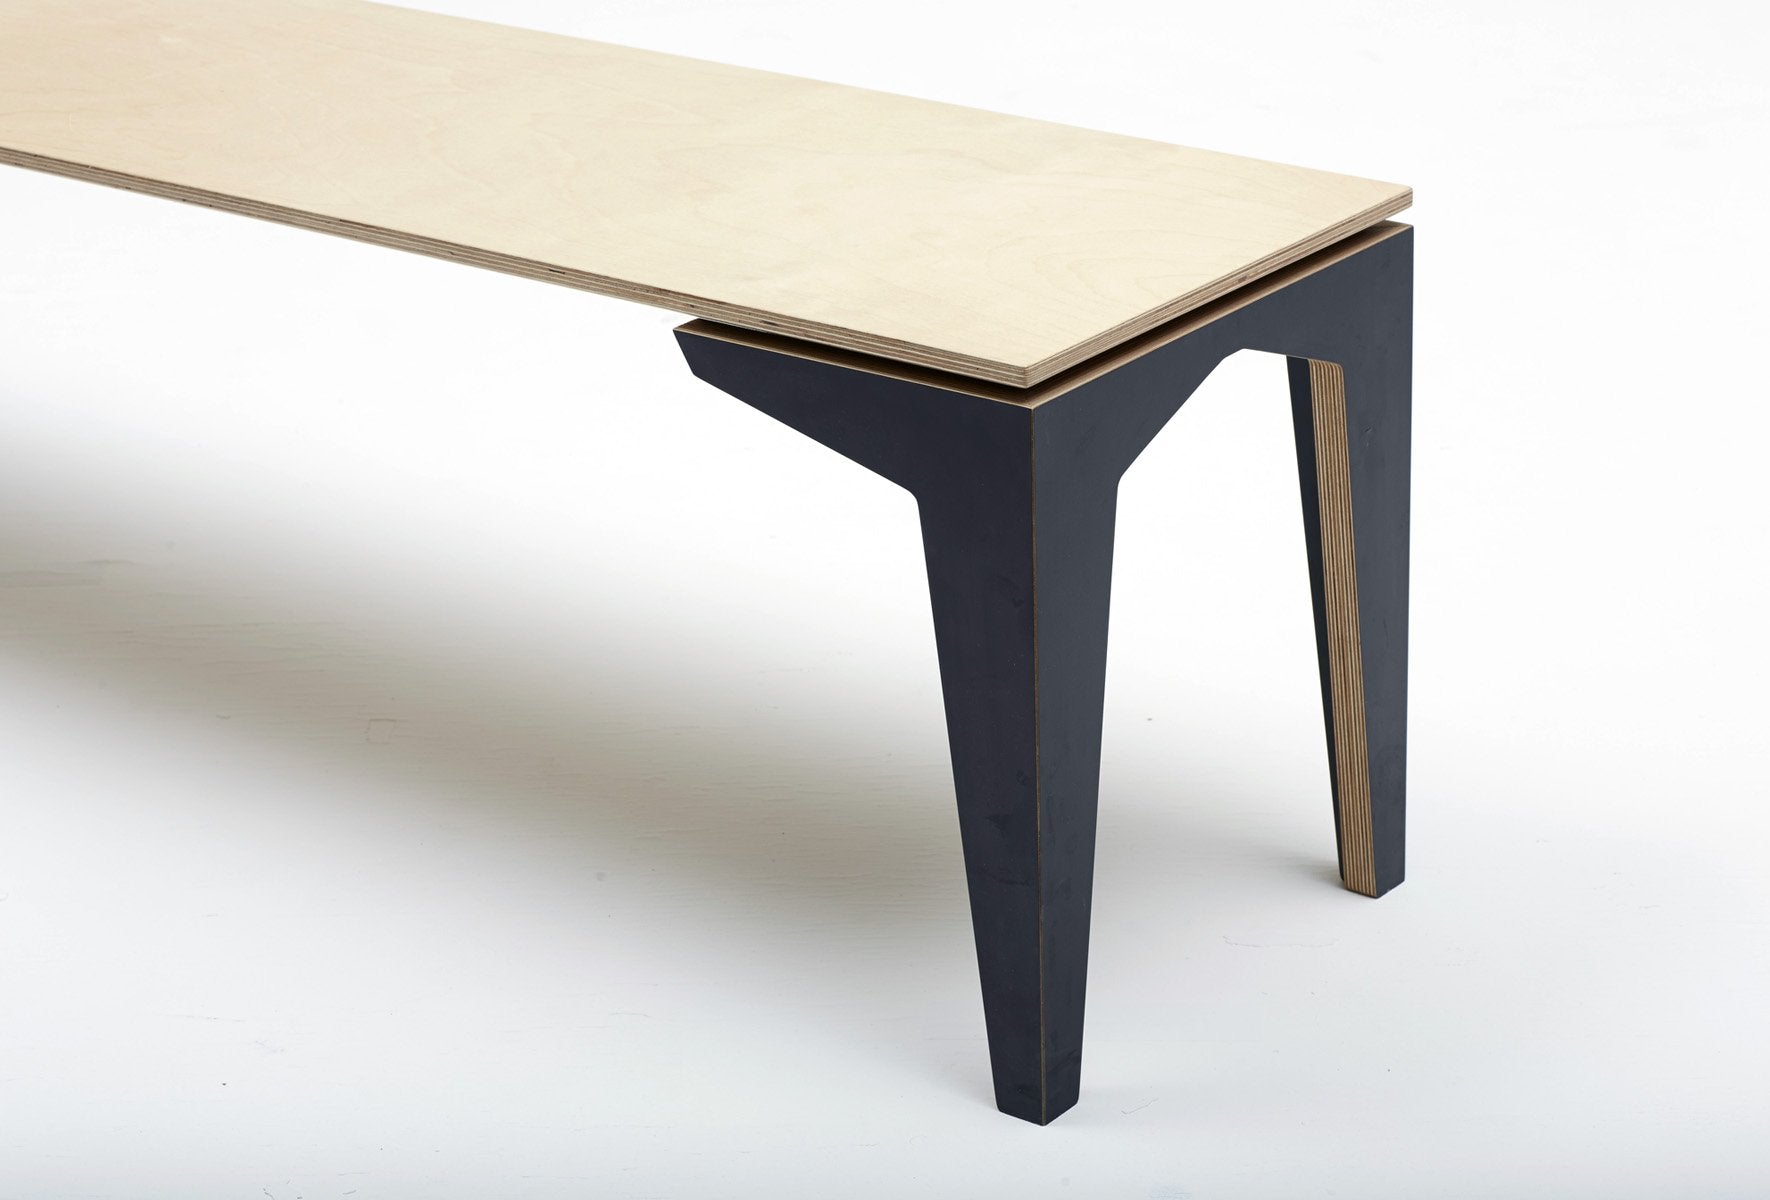 Floating Bench Seat - 140x39cm